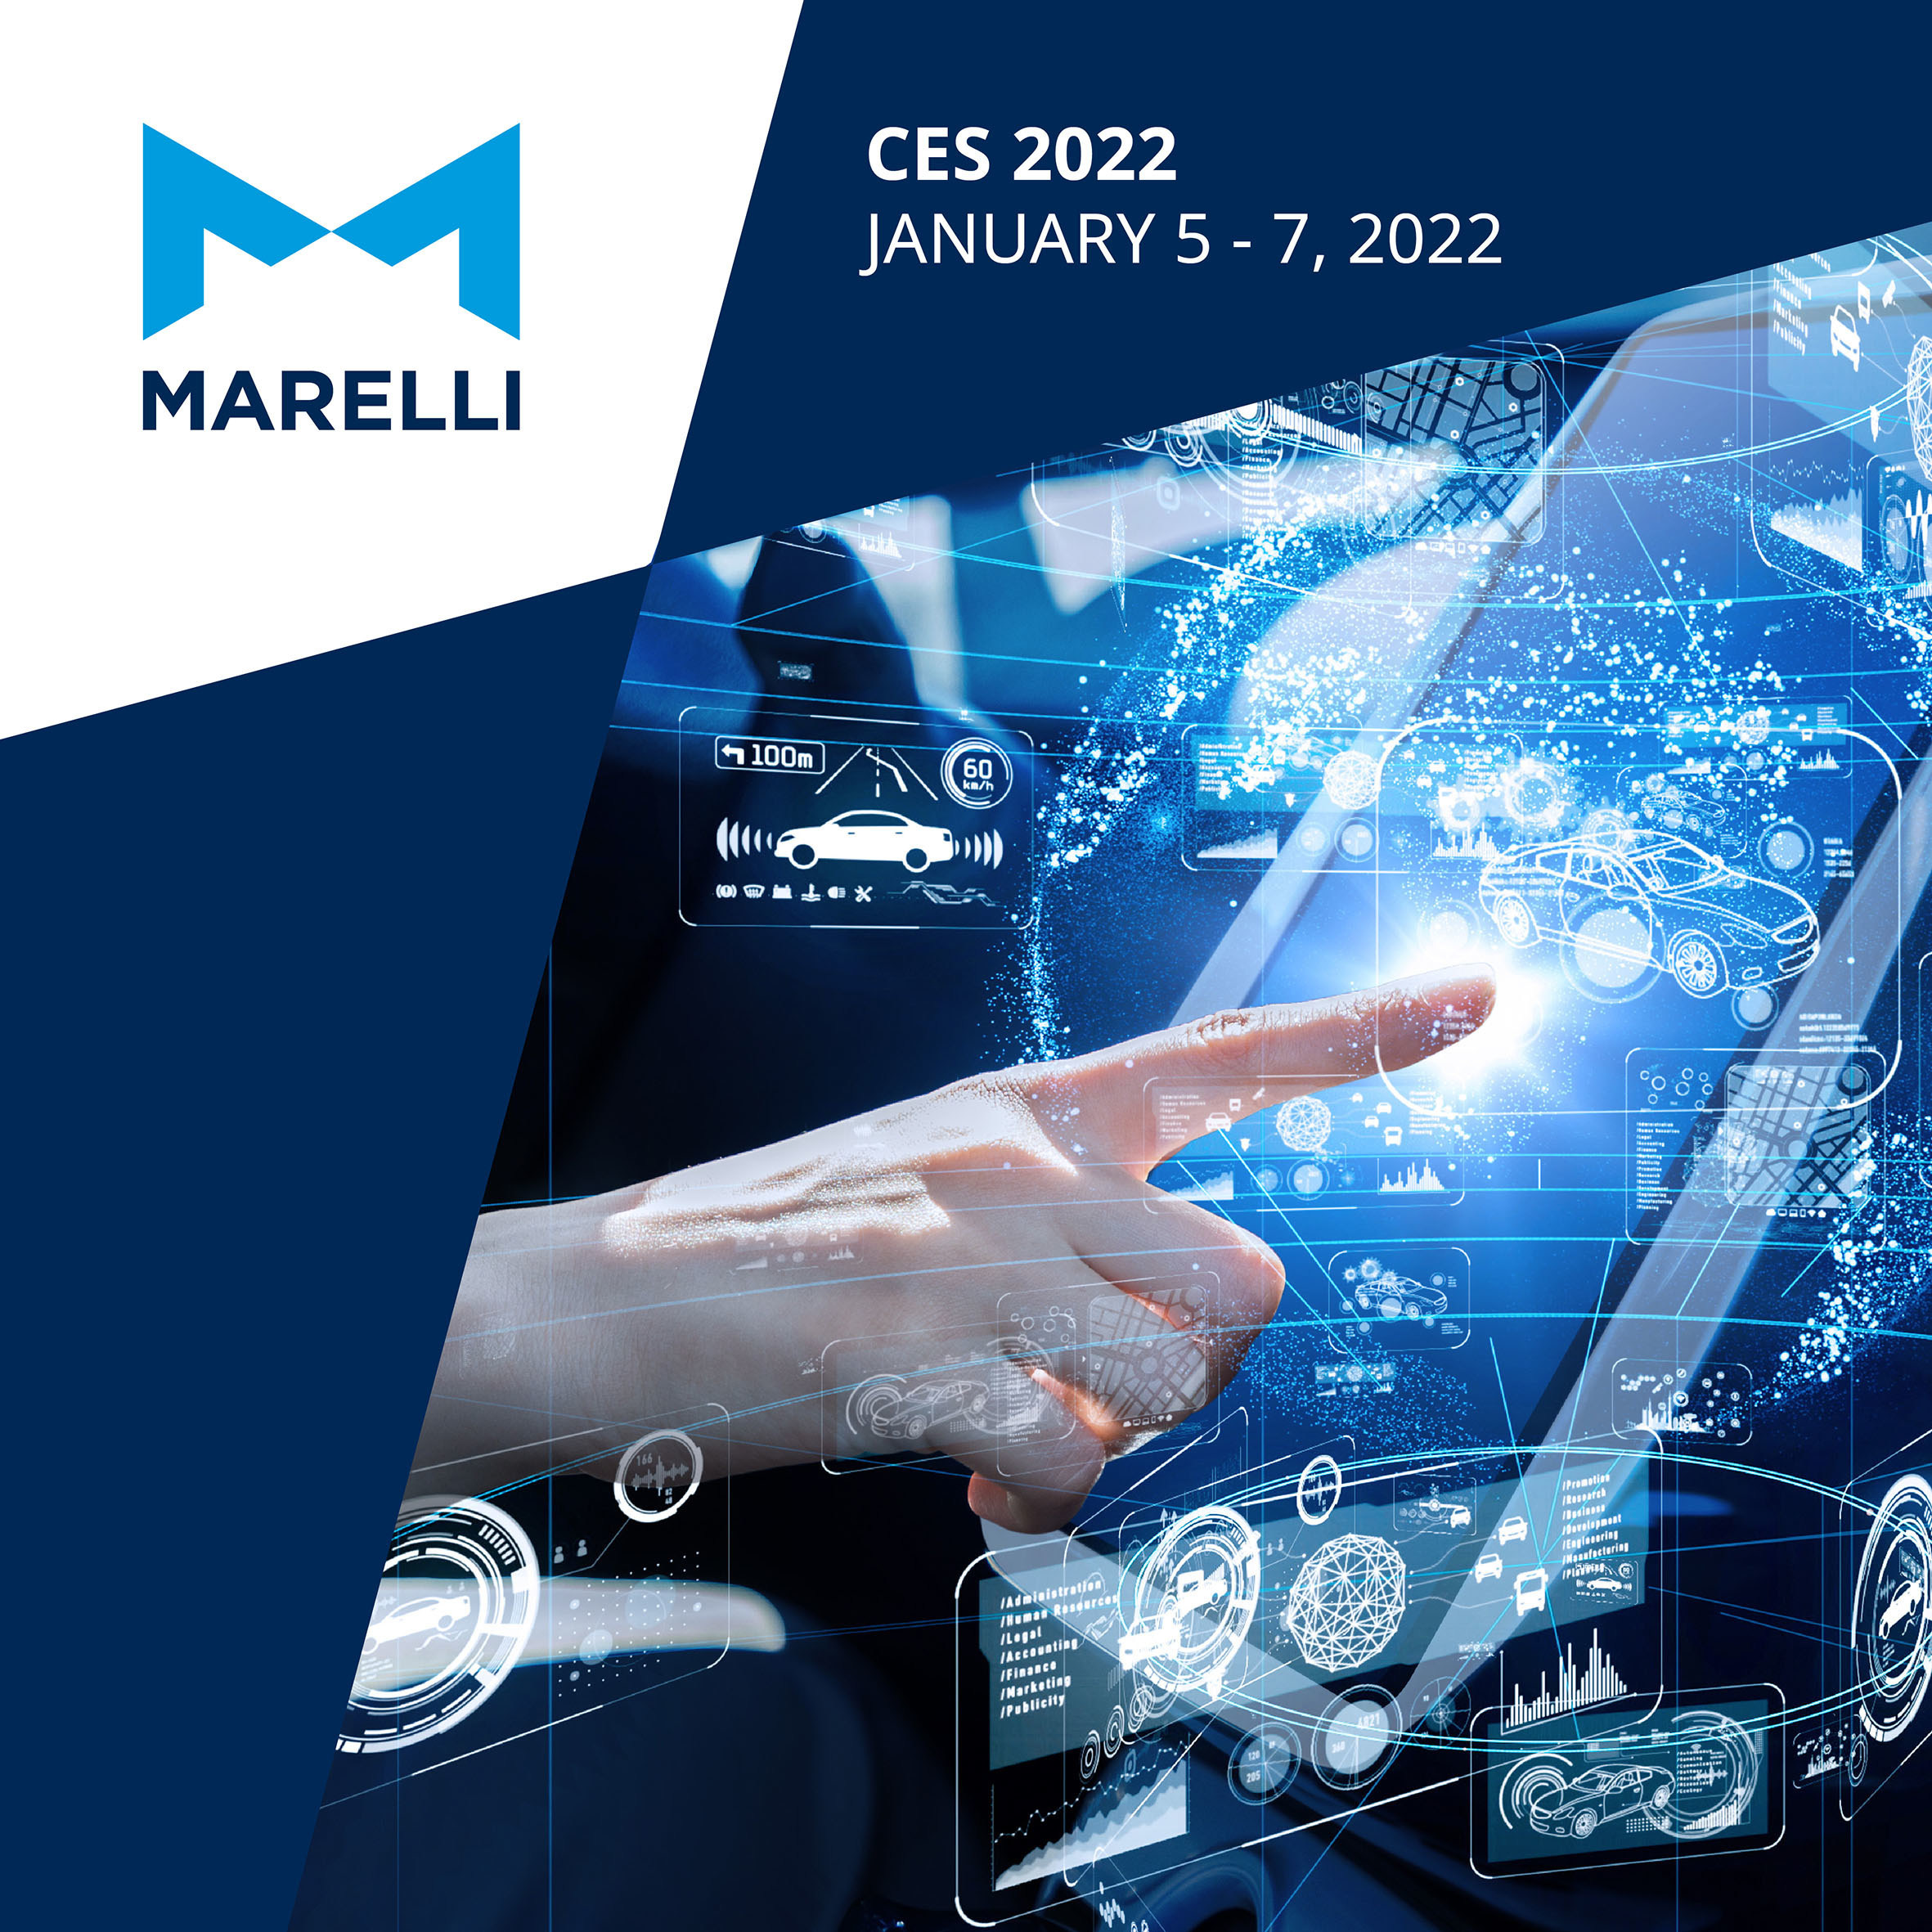 Marelli to Showcase New Products at CES | THE SHOP